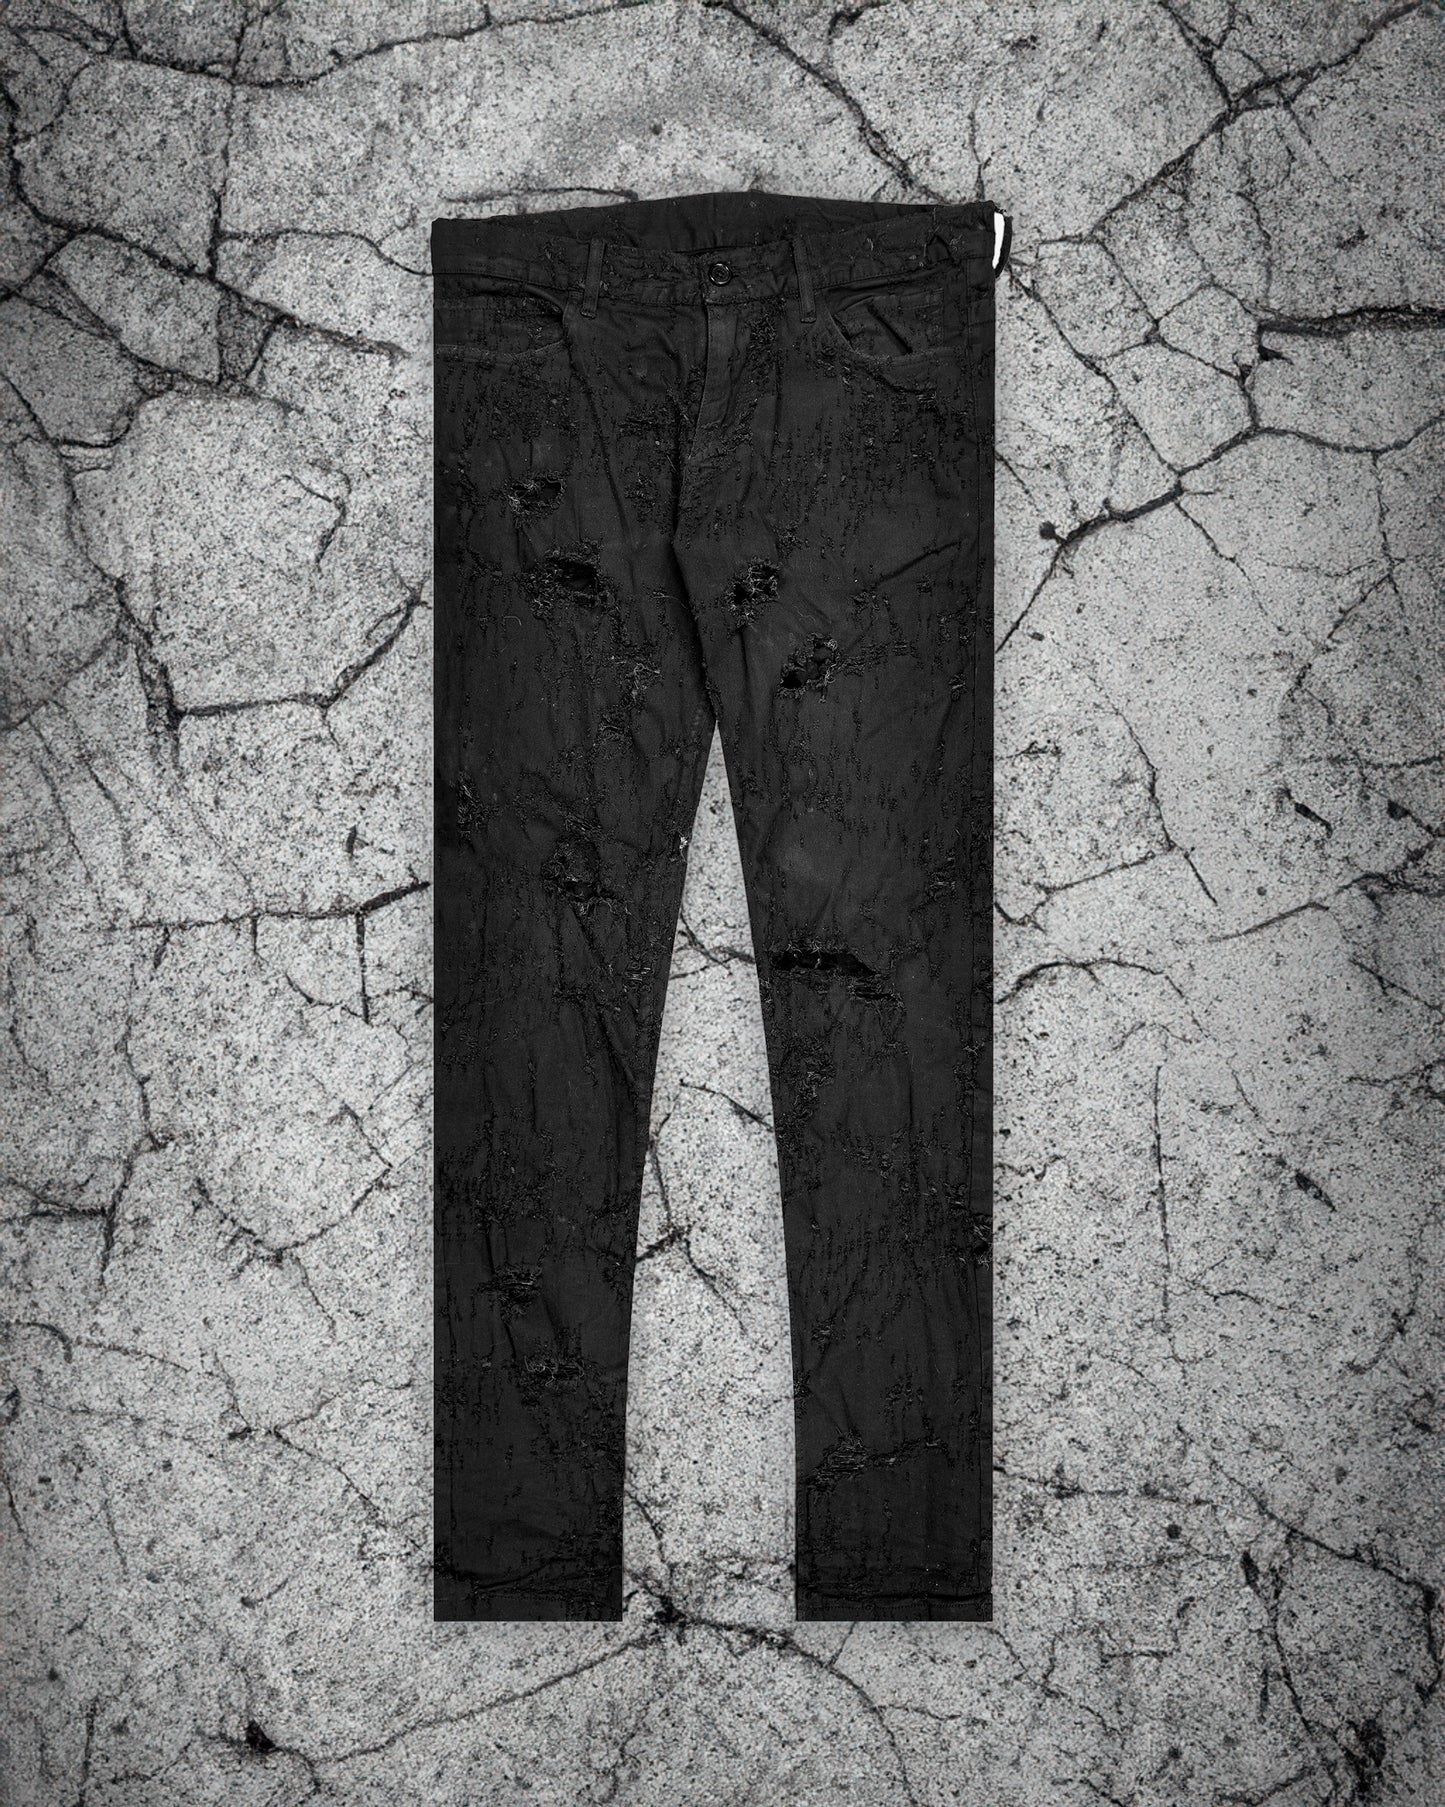 Ann Demeulemeester Norwood “Scab” Jeans - SS18